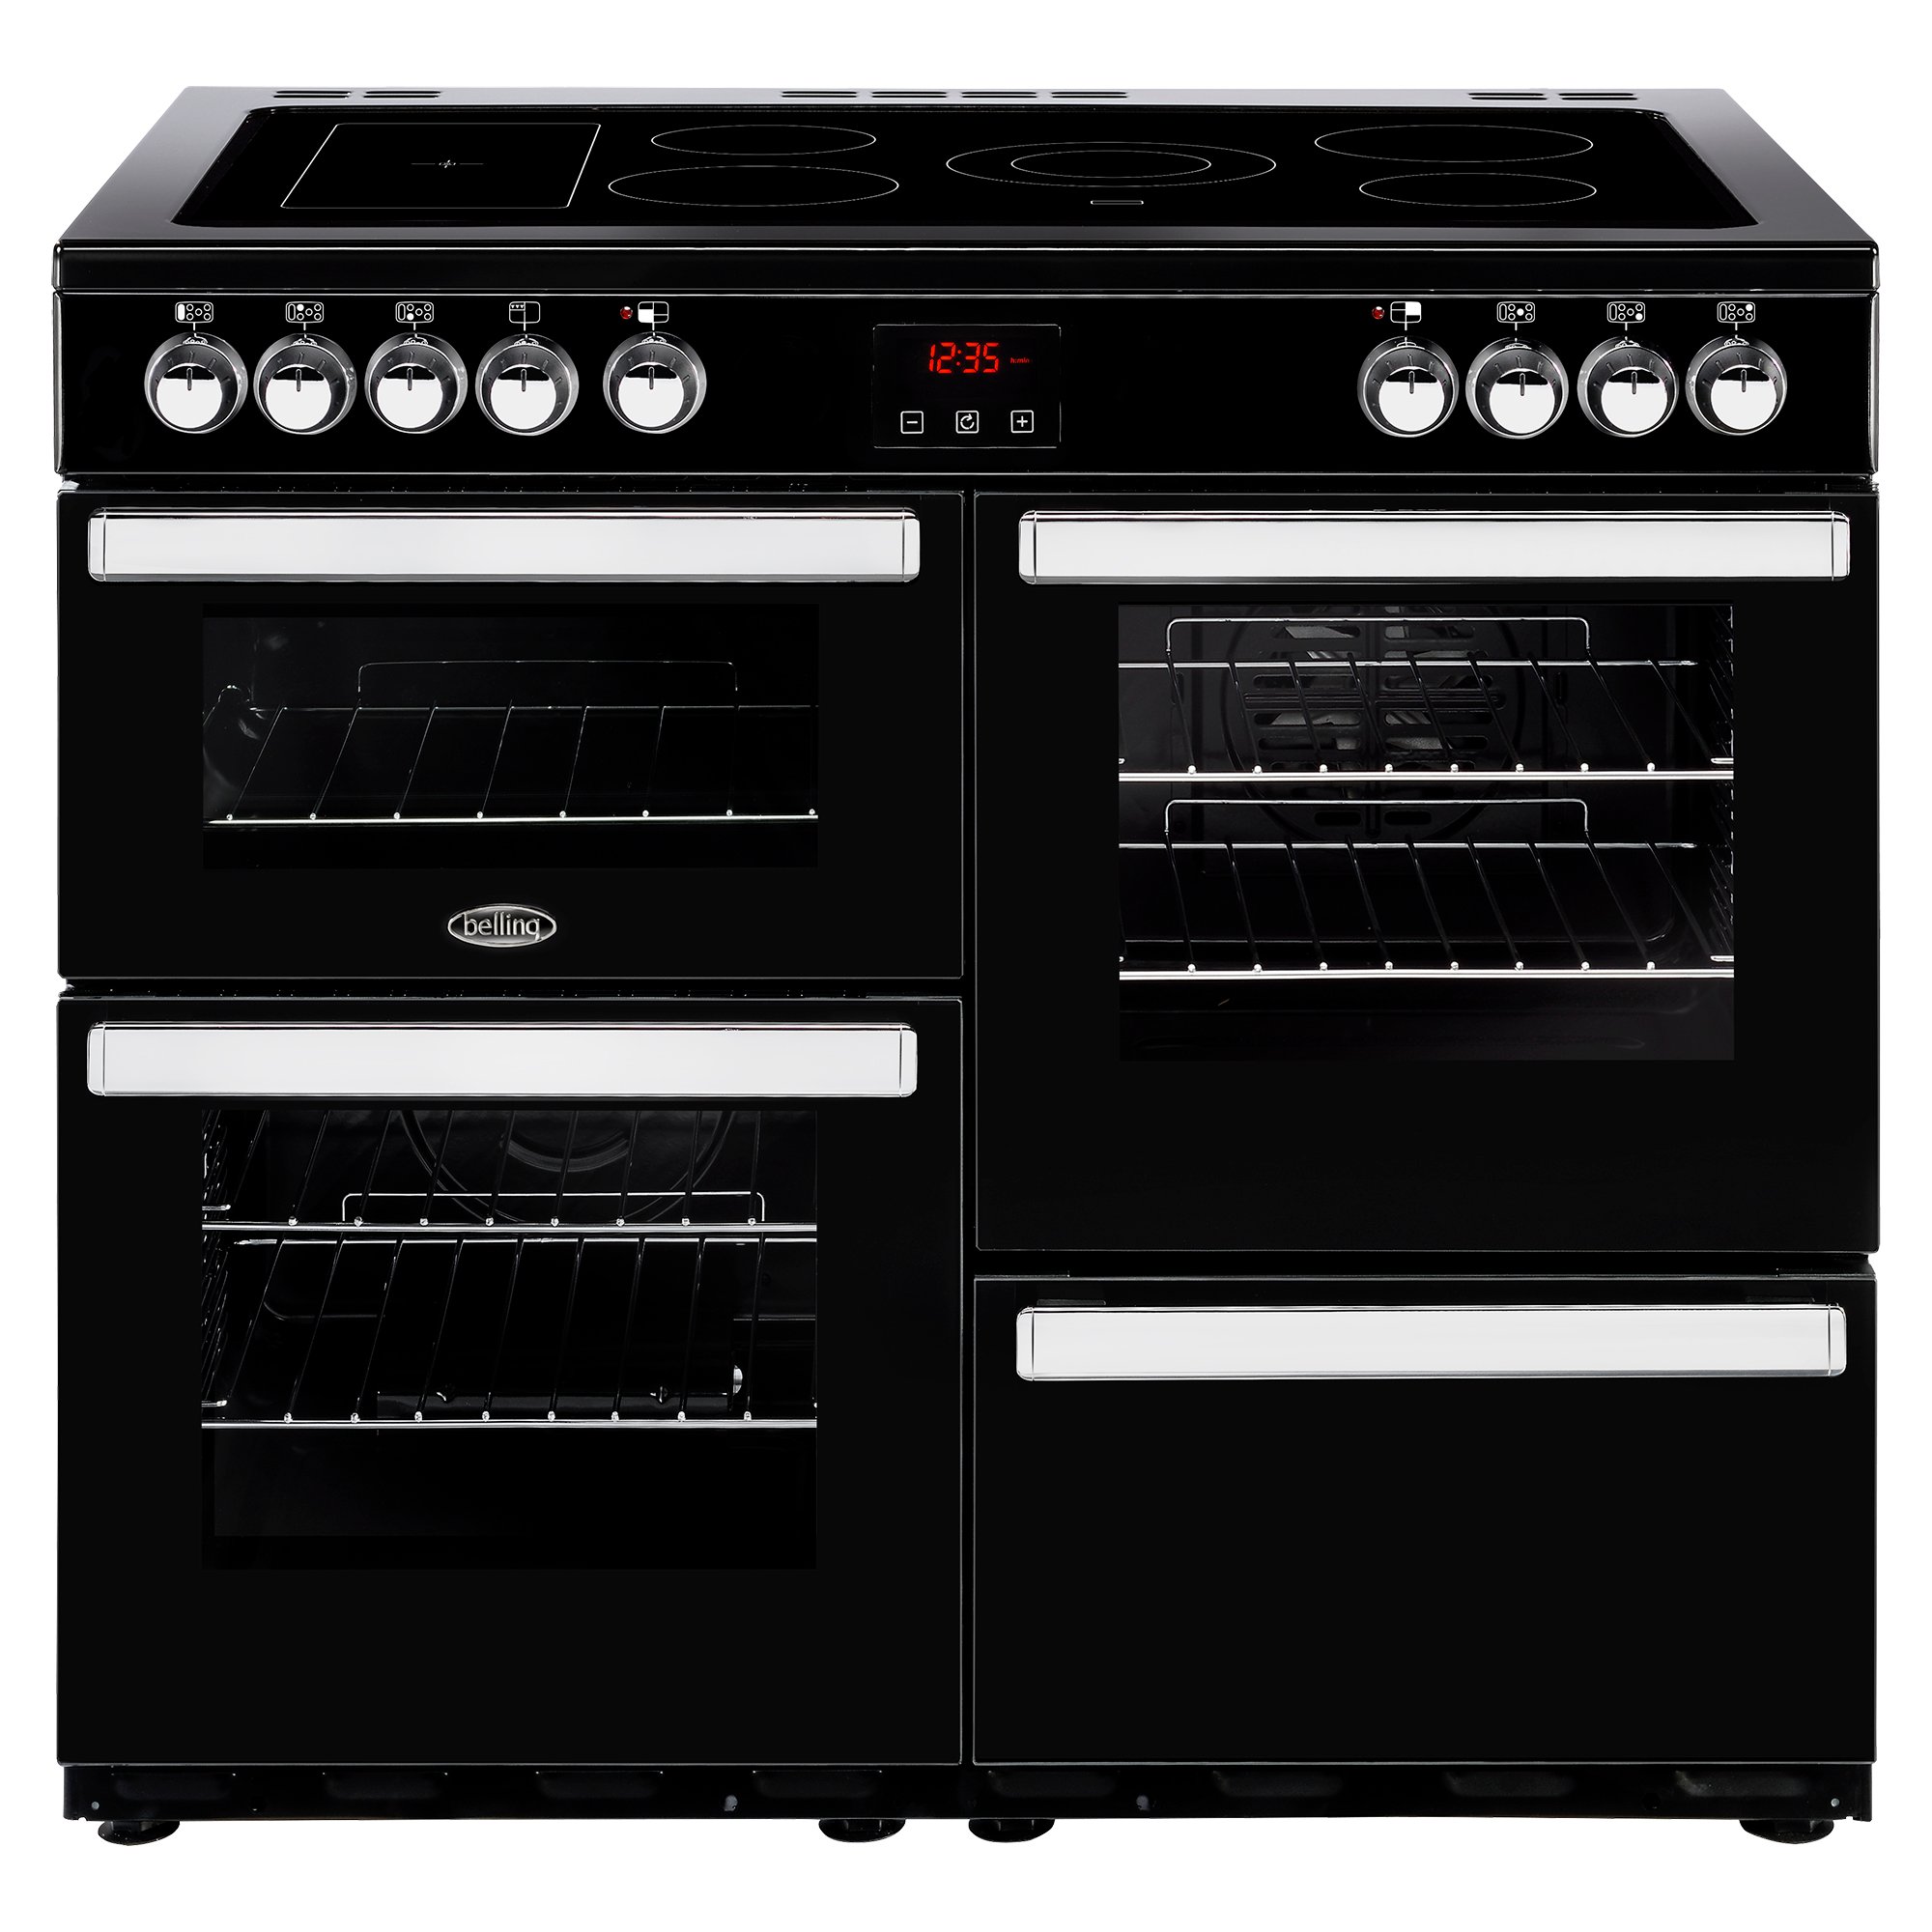 100cm electric range cooker with 5 zone ceramic hotplate plus warming zone, Maxi-Clock and easy clean enamel.